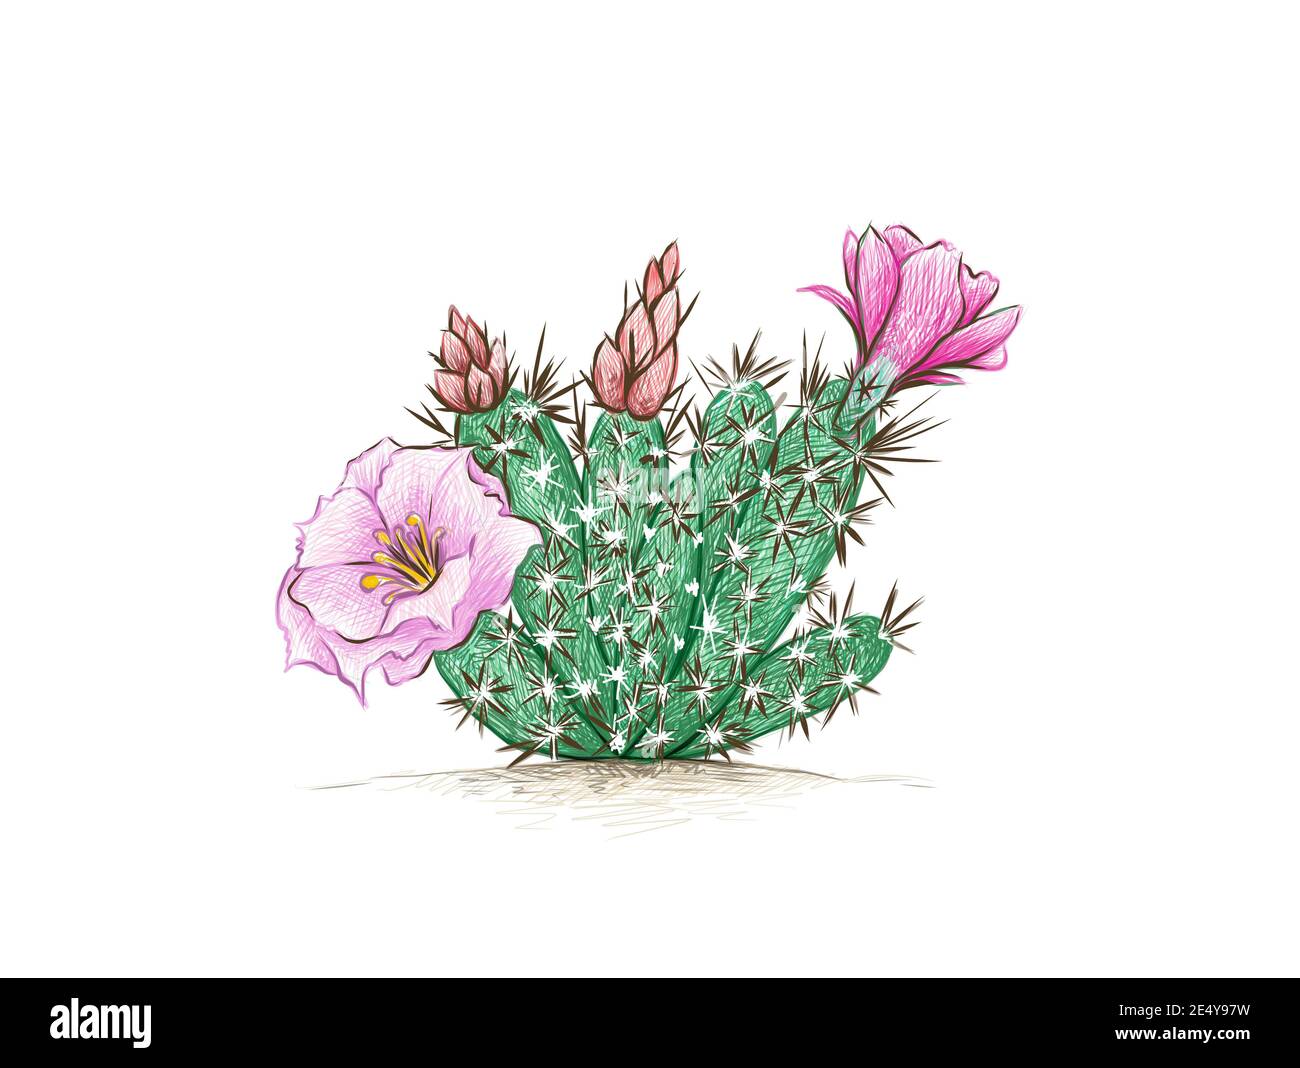 Illustration Hand Drawn Sketch of Grusonia Cactus with Pink Flower for Garden Decoration. Stock Photo